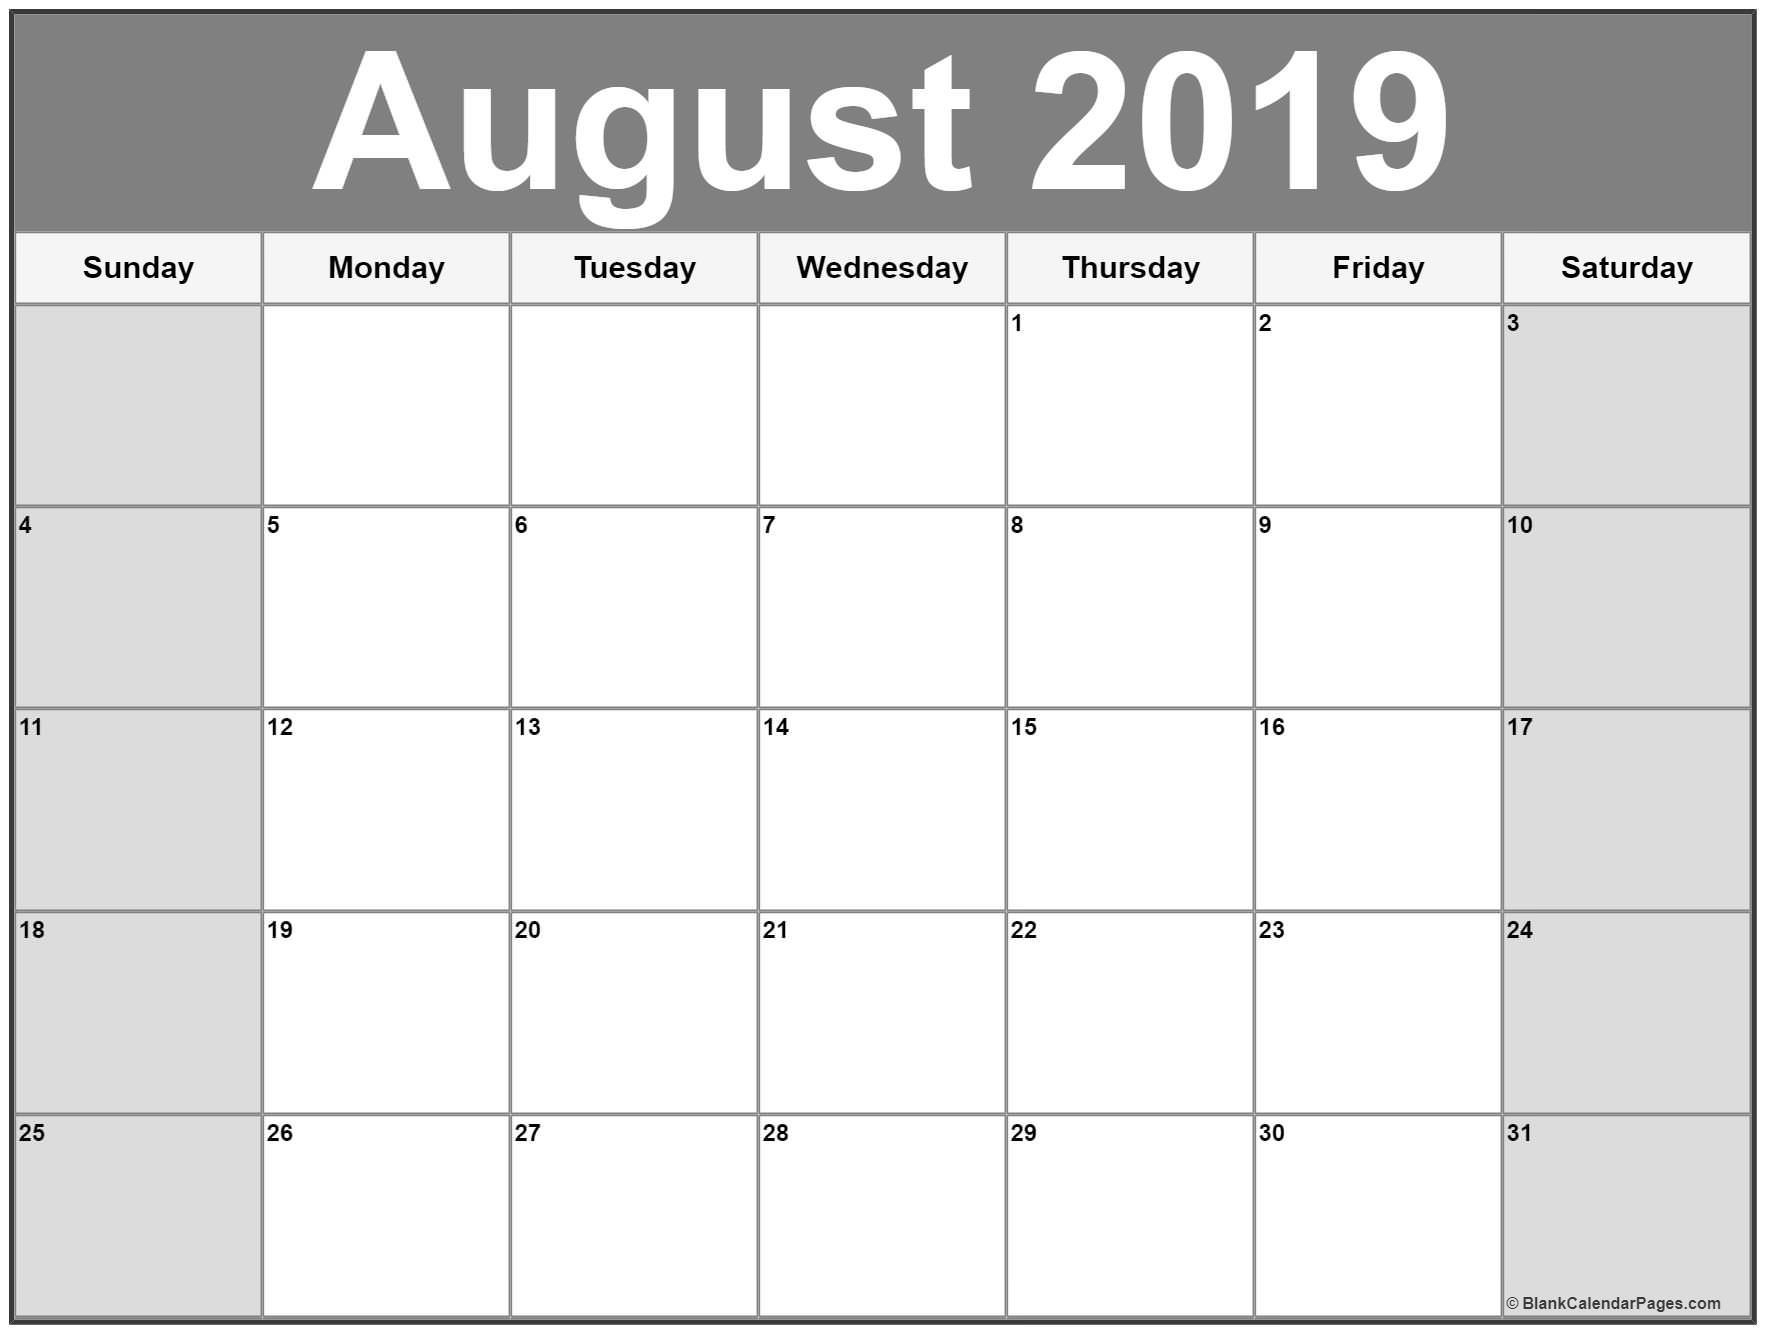 August 2019 Calendar Printable Free | Calendar Printables-Printable Monthly Calenders For July And August